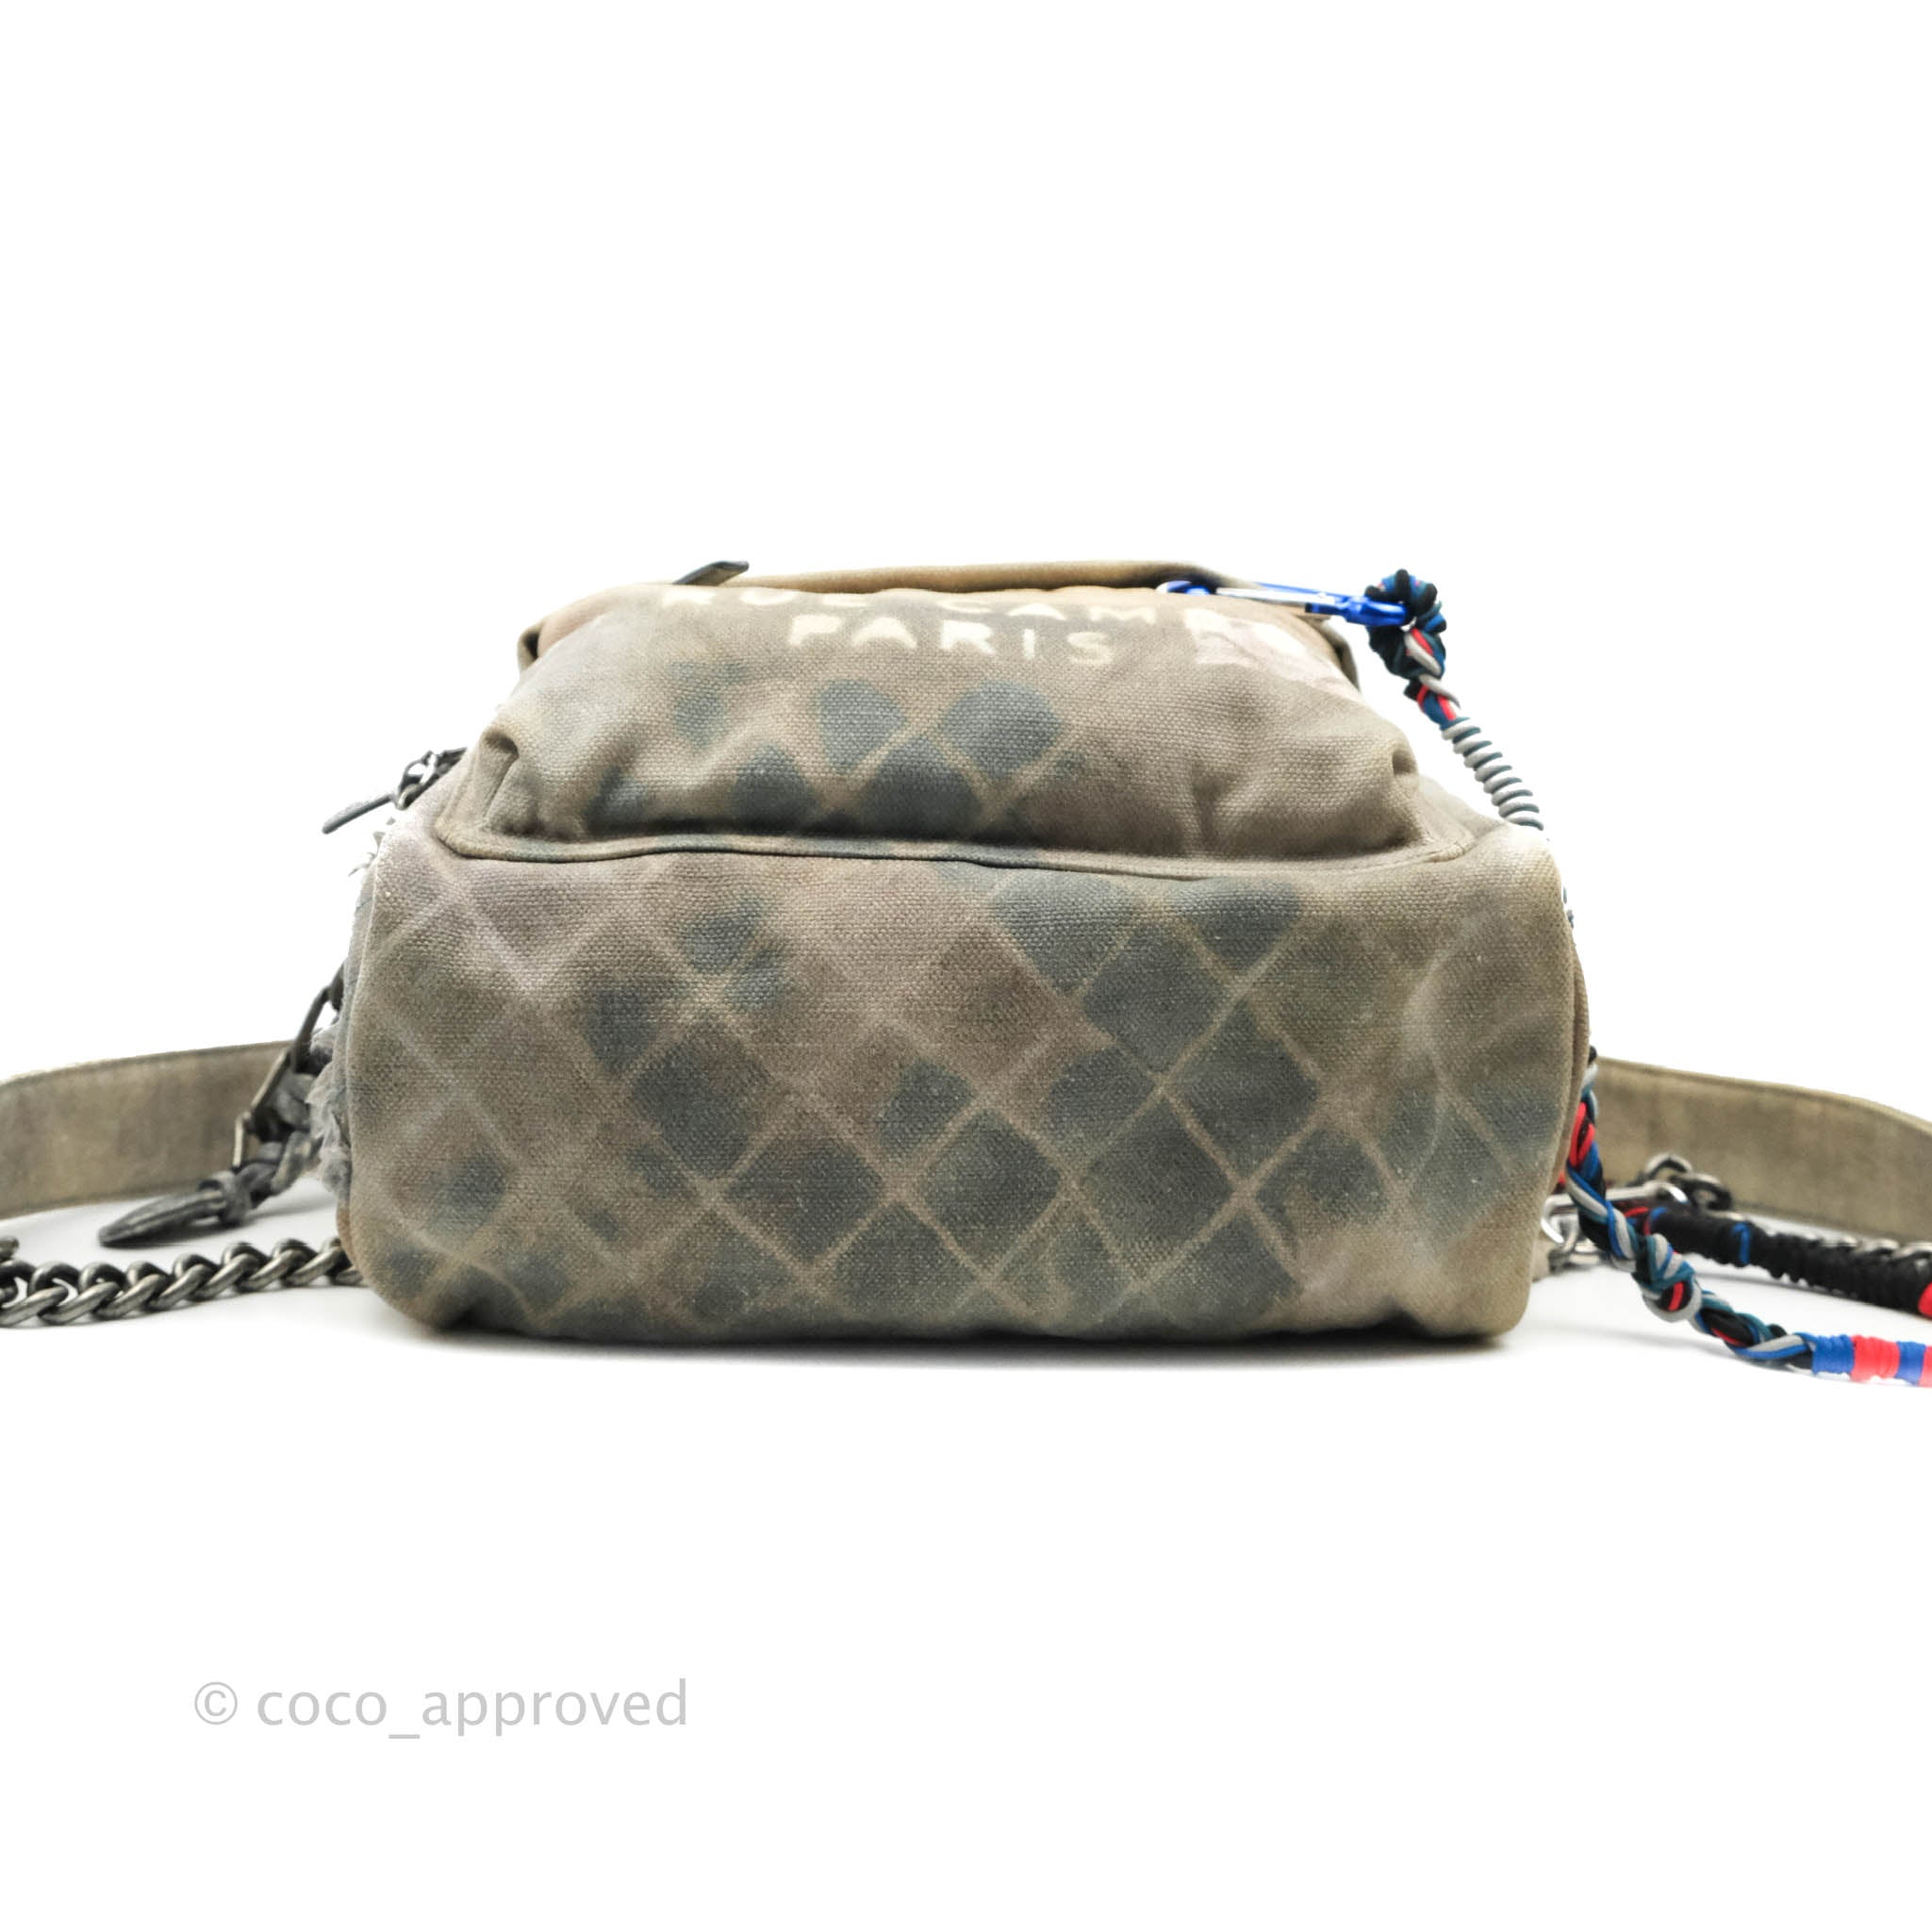 Chanel Medium Graffiti Printed Canvas Backpack Beige – Coco Approved Studio